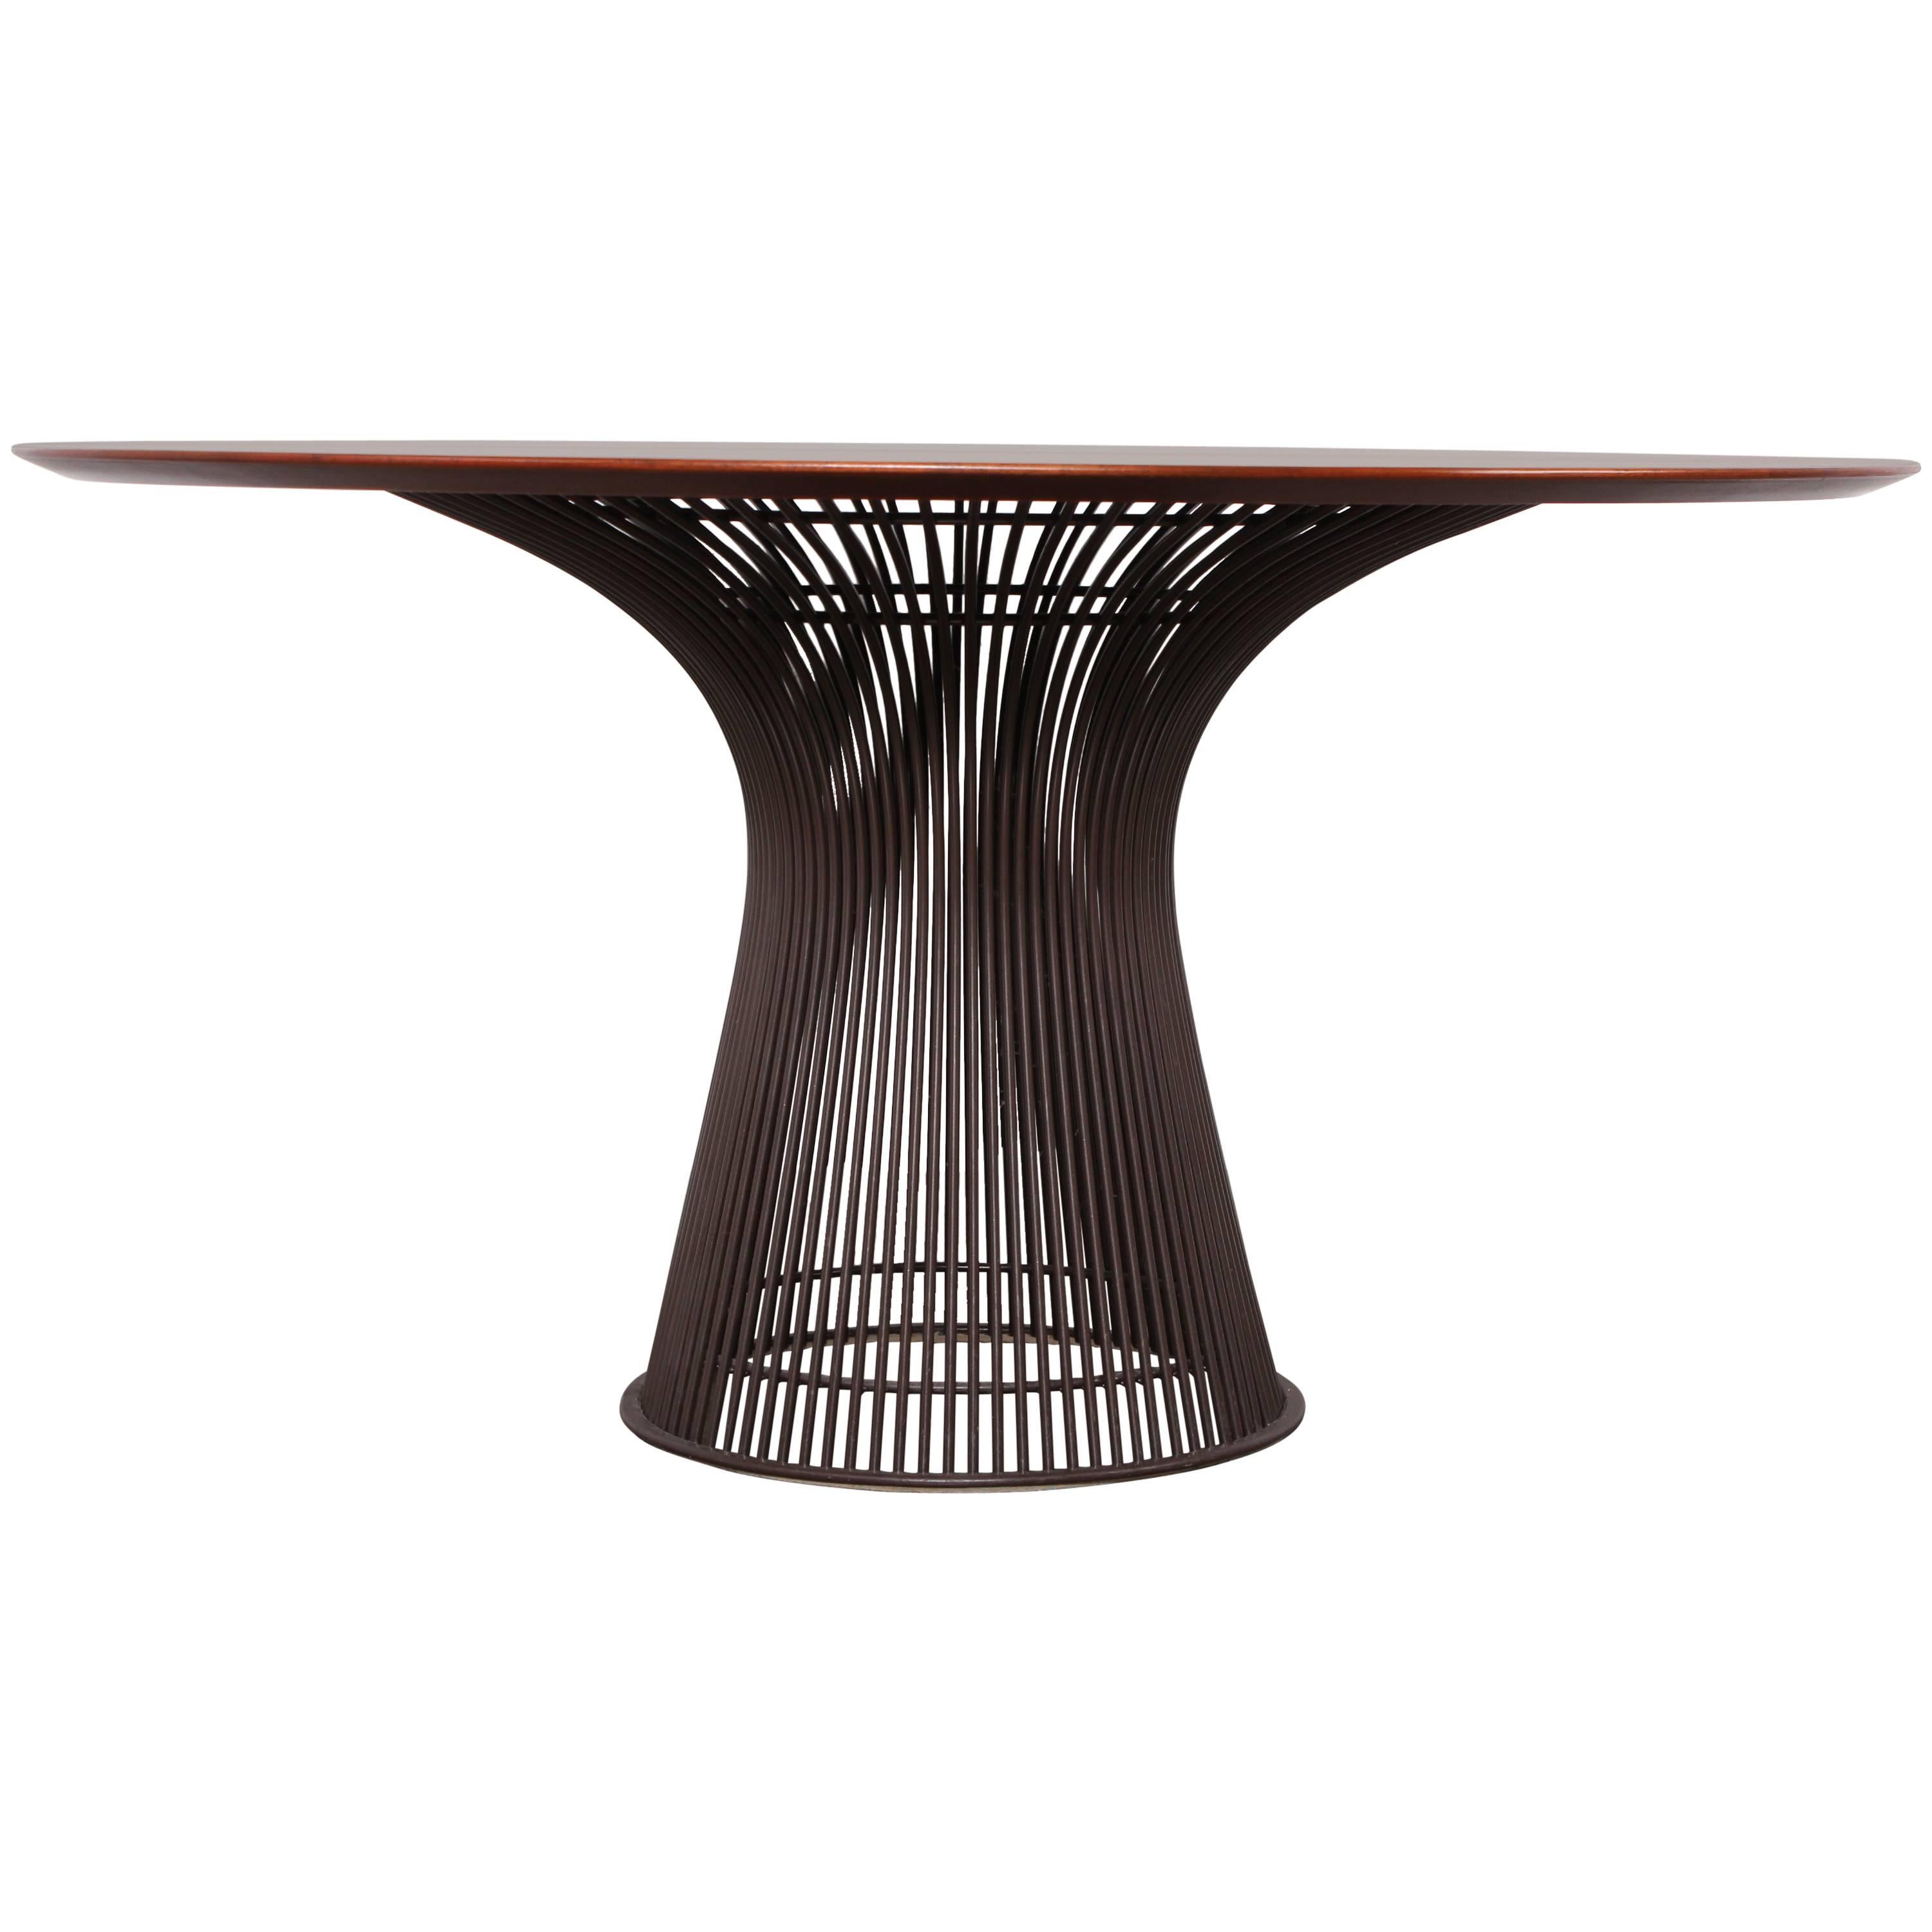 Teak and Bronze Dining Table by Warren Platner for Knoll